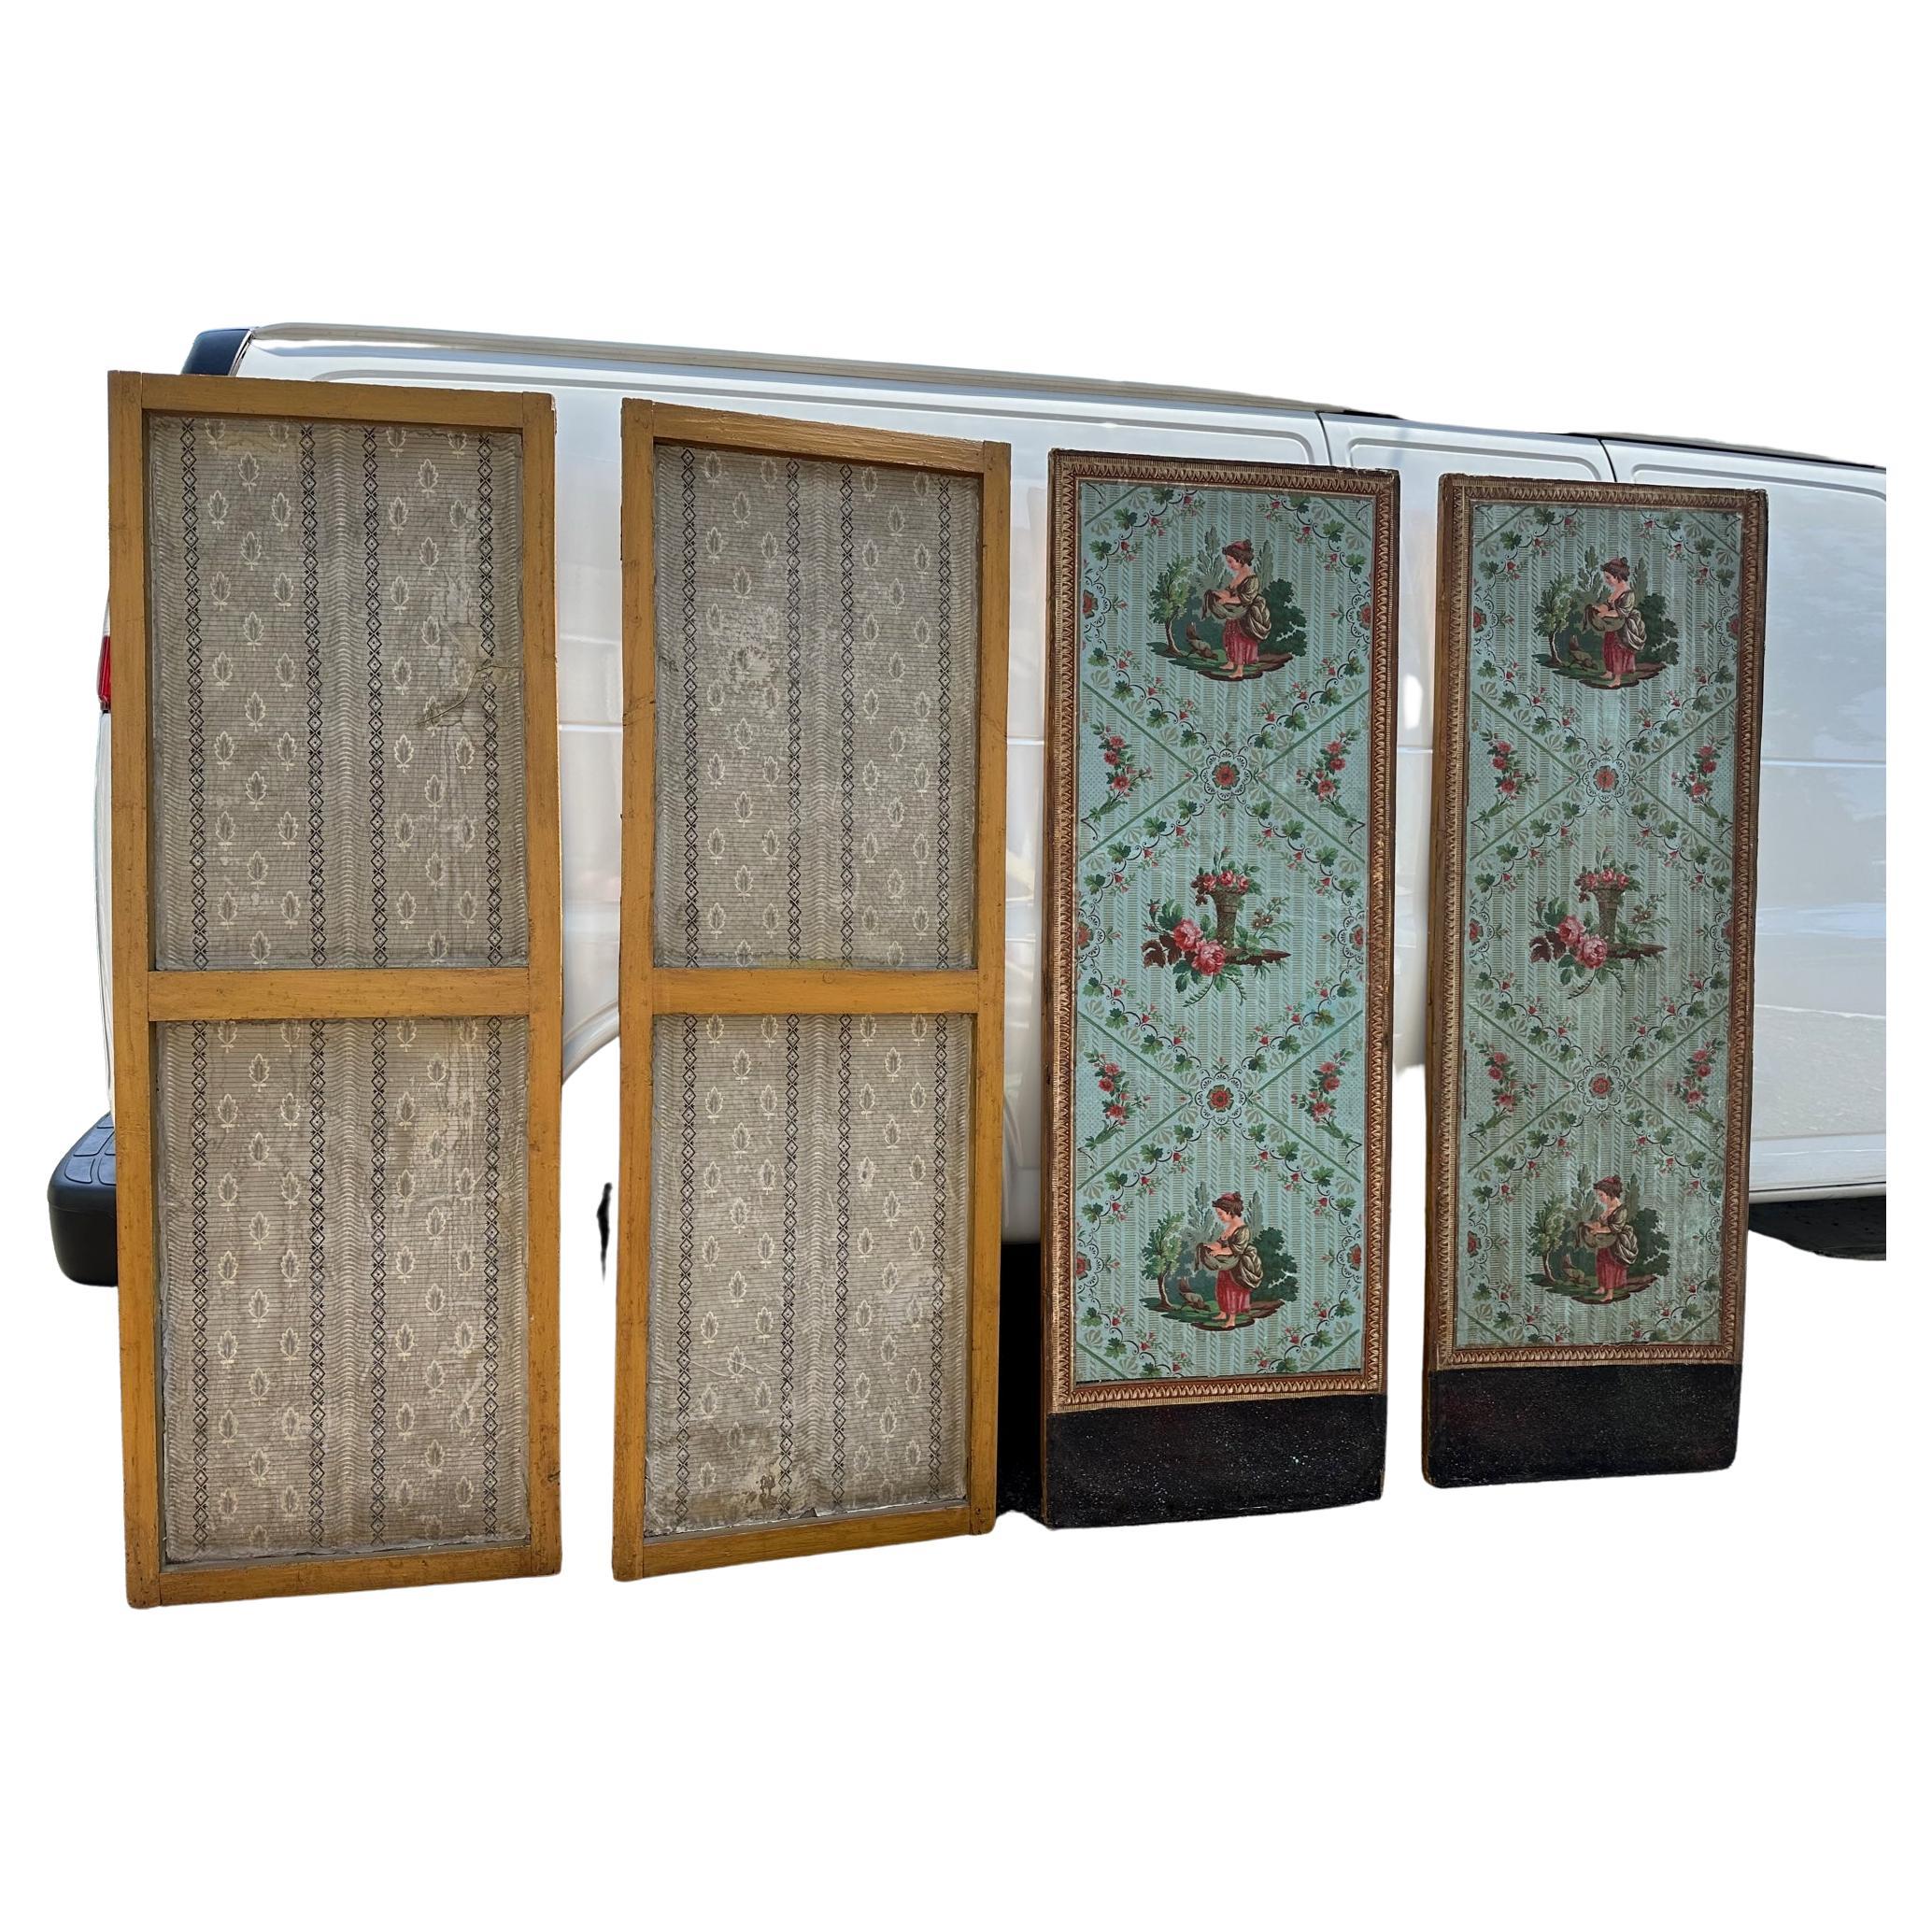 Early 20th Century Set of 4 Antique Continental Hand Painted Framed Paper Panels or Screens For Sale